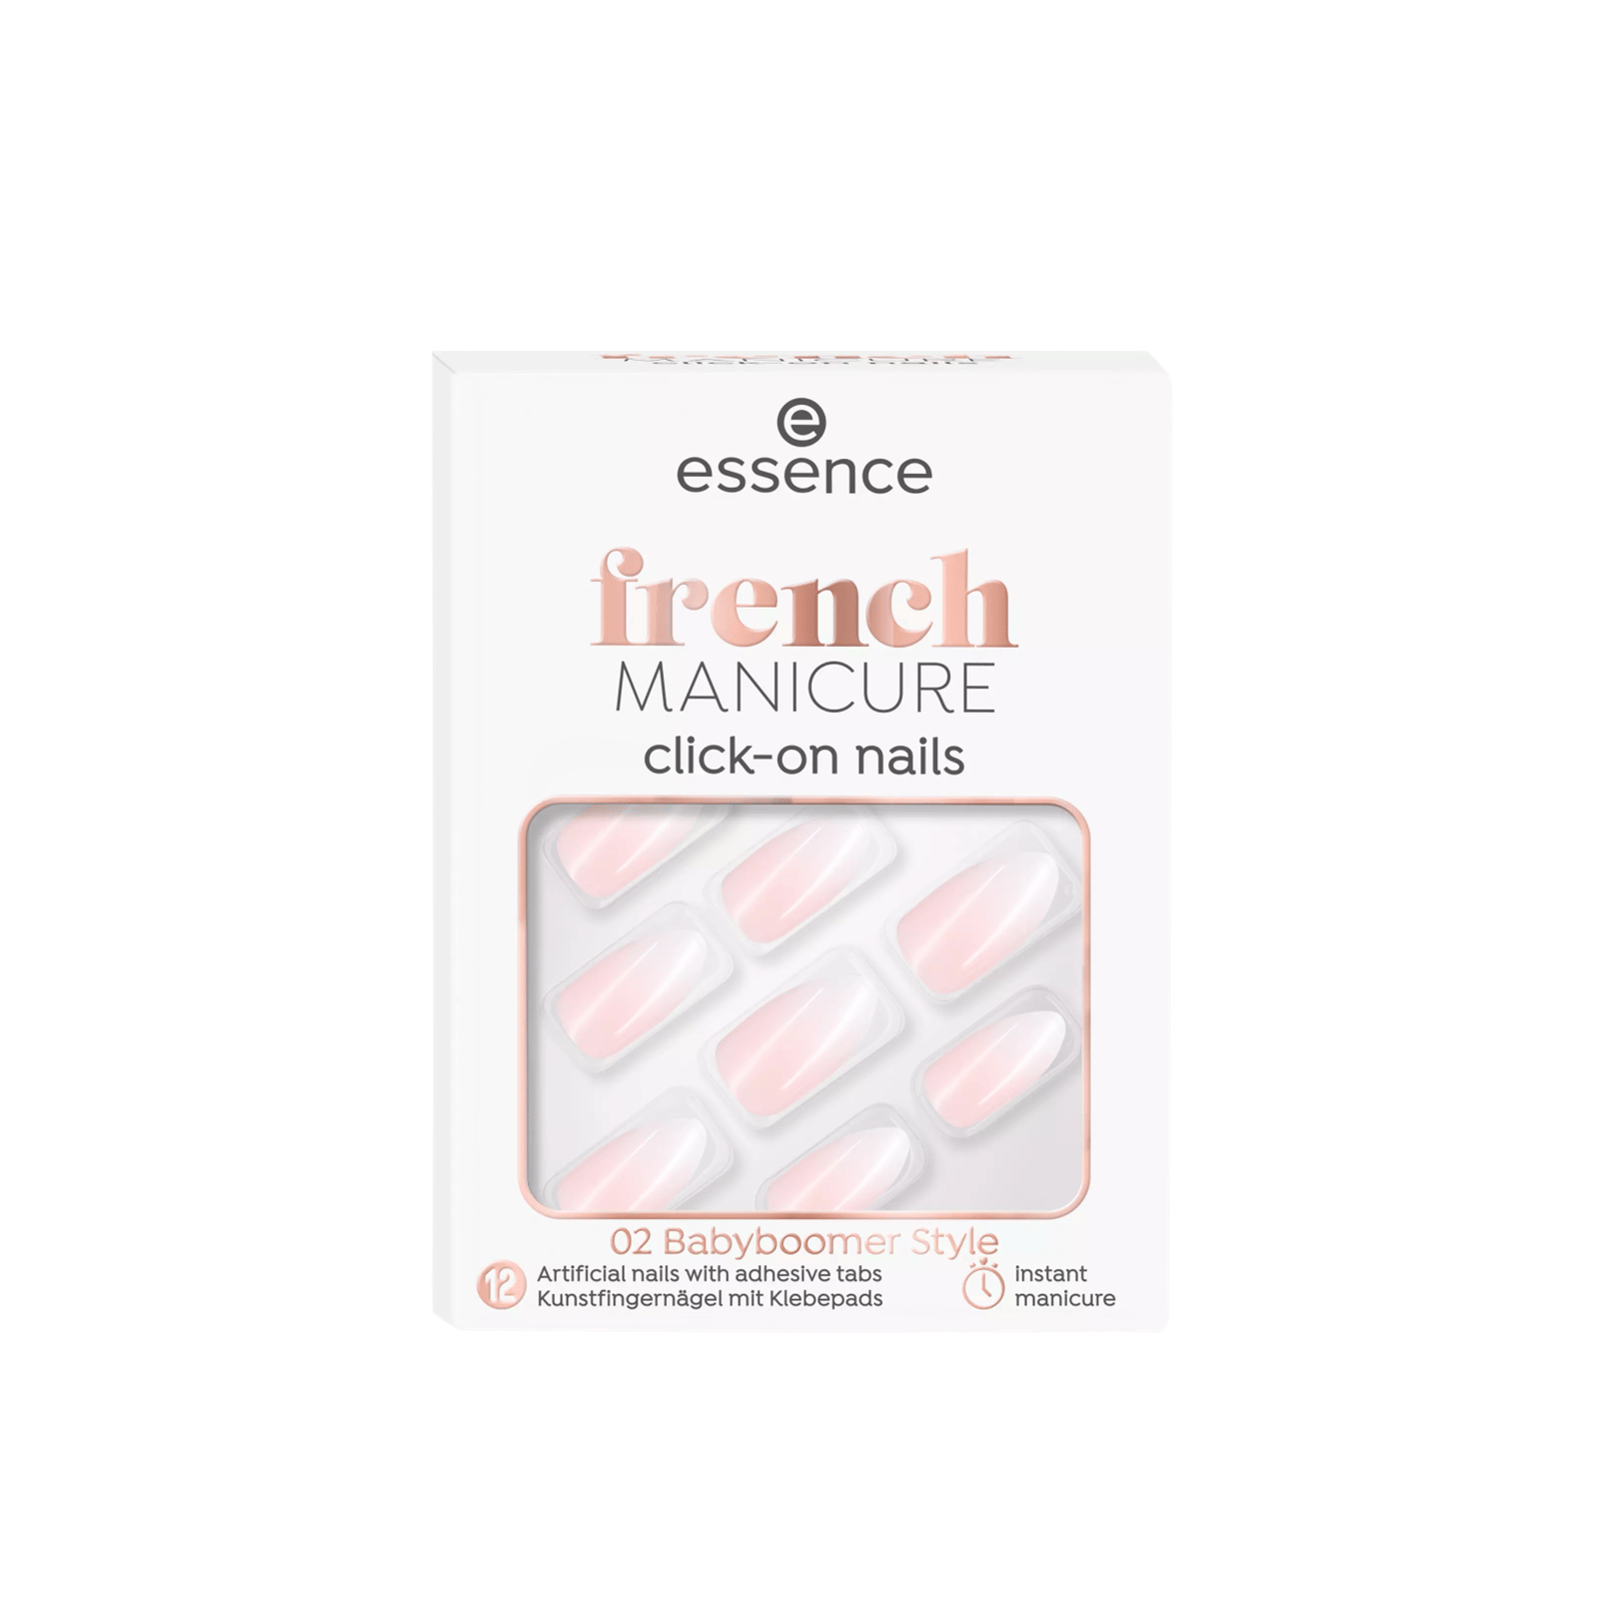 essence French Manicure Click-On Nails 02 Babyboomer Style x12